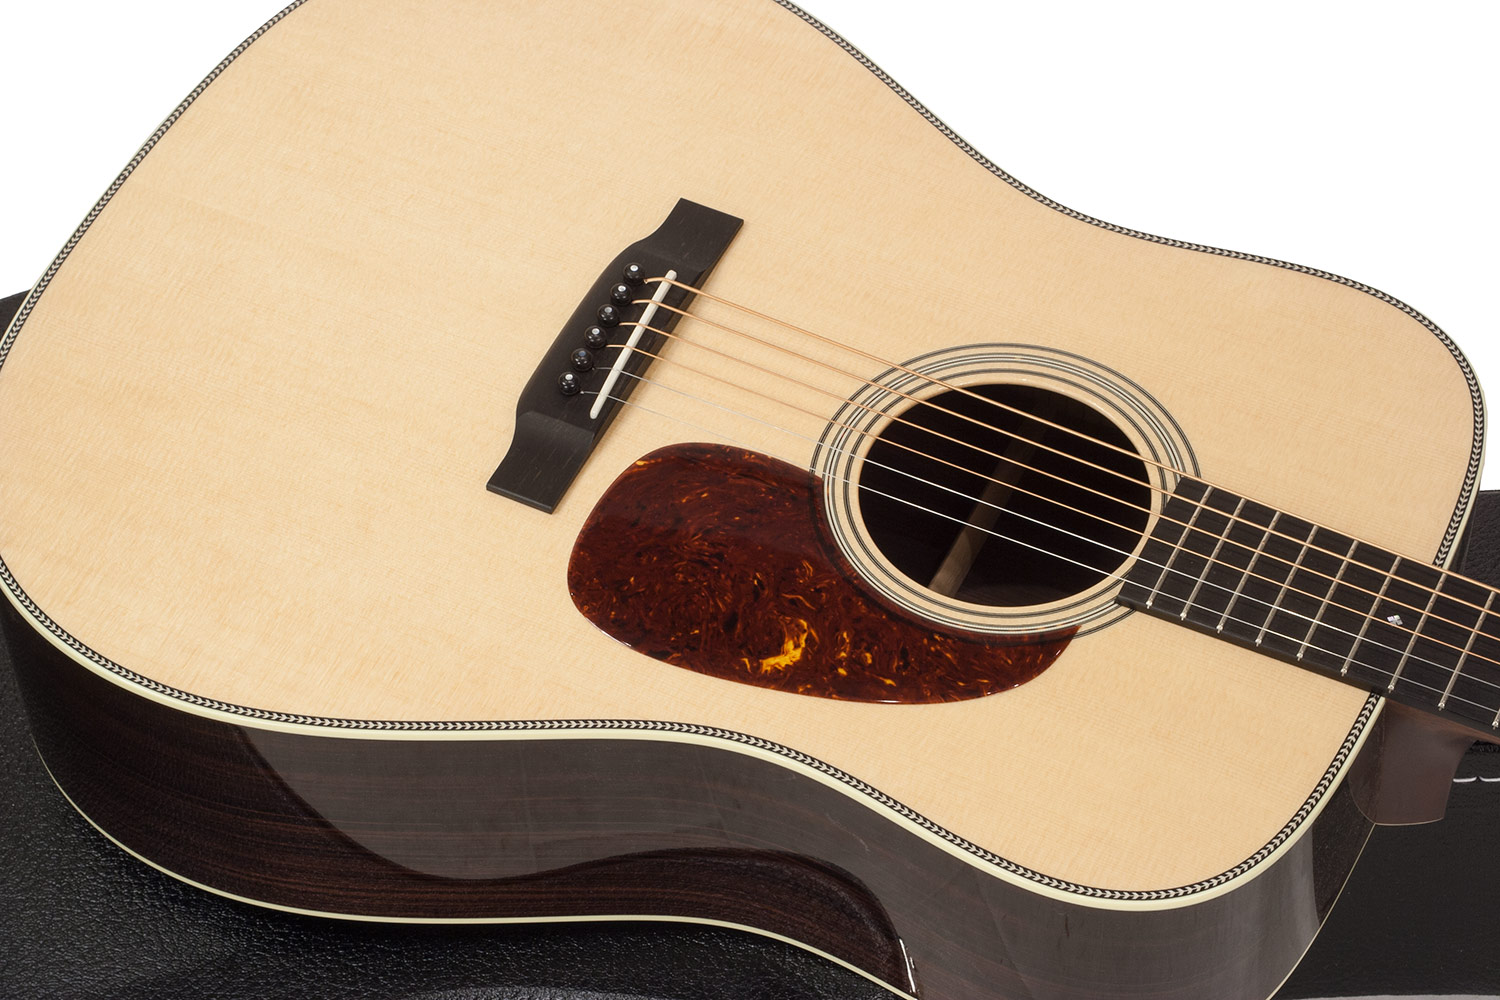 Collings D2h Custom Satin Neck, Torch Head #27113 - Natural - Acoustic guitar & electro - Variation 2